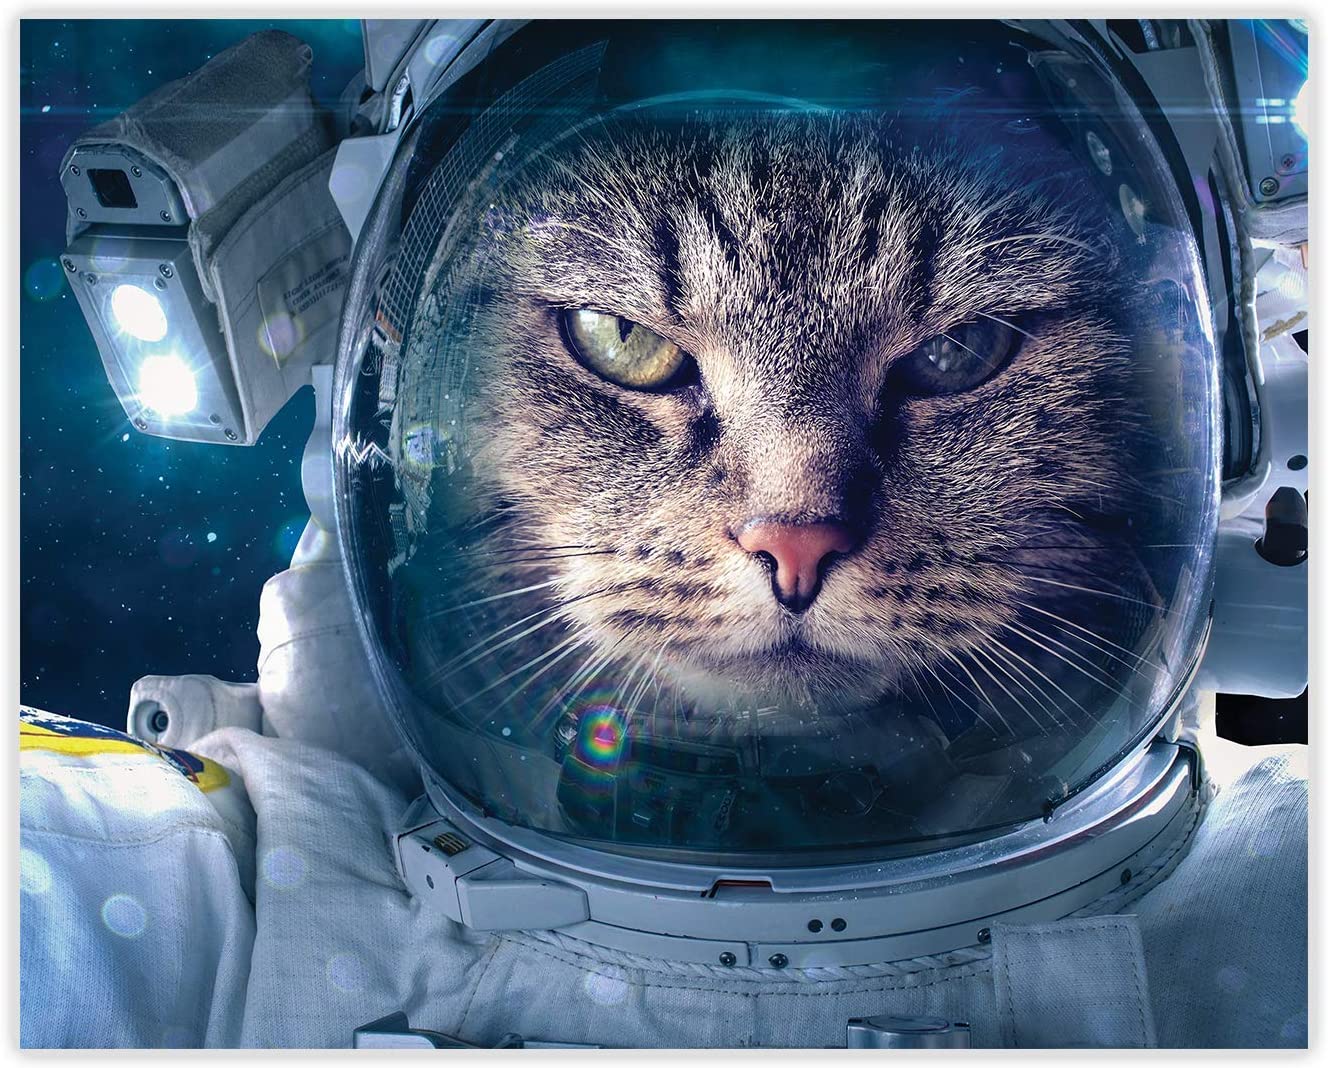 Astronaut Cat Poster Space Prints of 4 (10 x 8) Galaxy Cat Wall Decor Astronaut Cat Art- Space Poster, Home Decor Picture for Bedroom: Posters & Prints